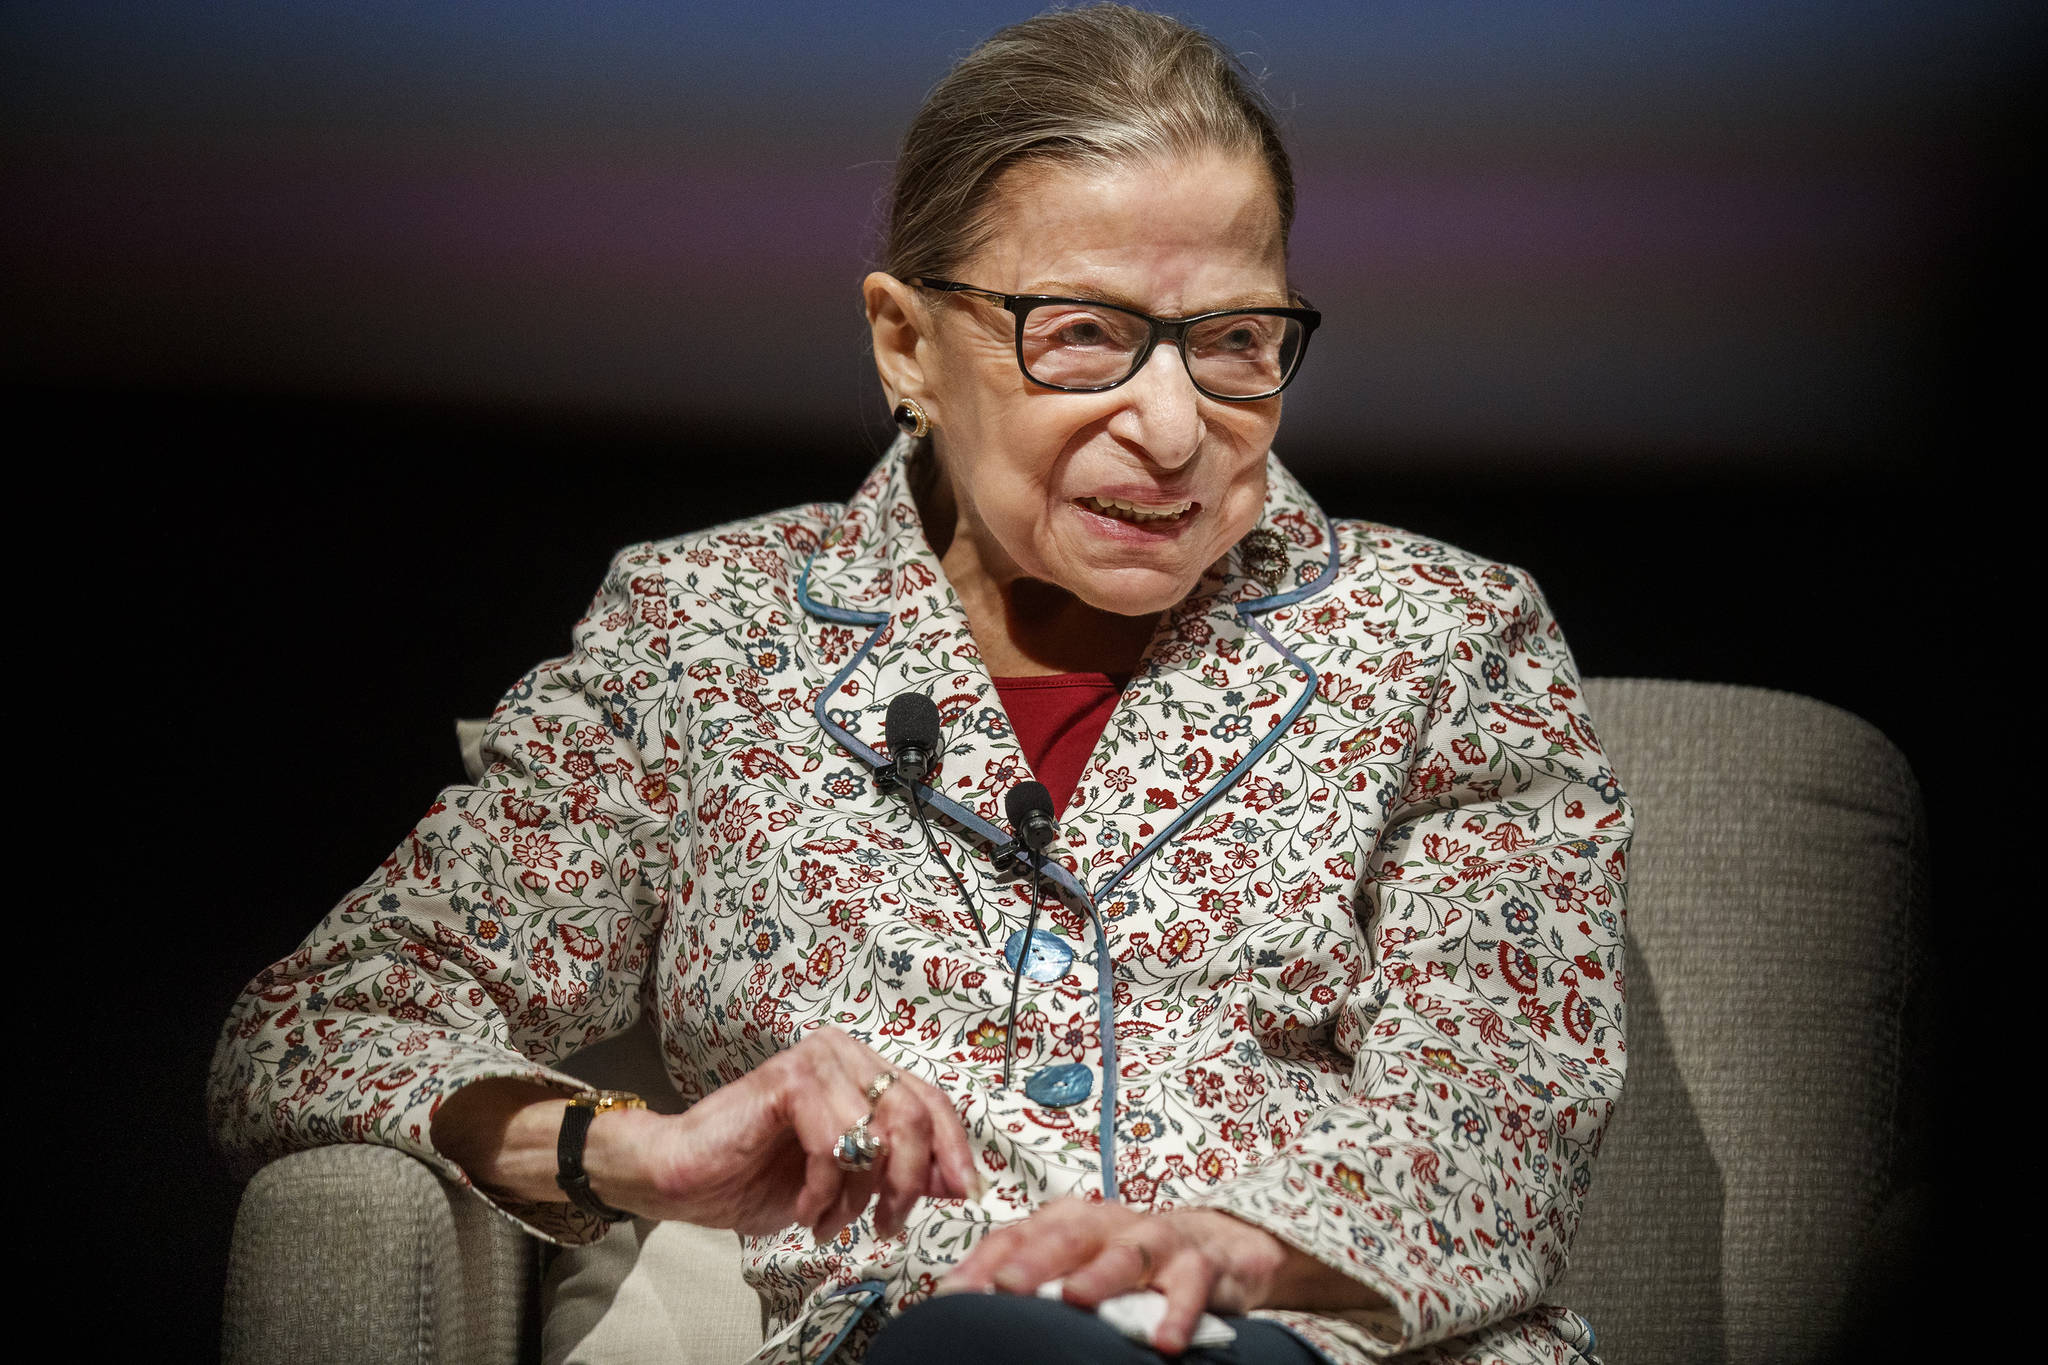 (Armando L. Sanchez/Chicago Tribune/TNS) Supreme Court Jusitice Ruth Bader Ginsburg attends a public conversation at the University of Chicago on September 9, 2019, in Chicago. She died Friday.